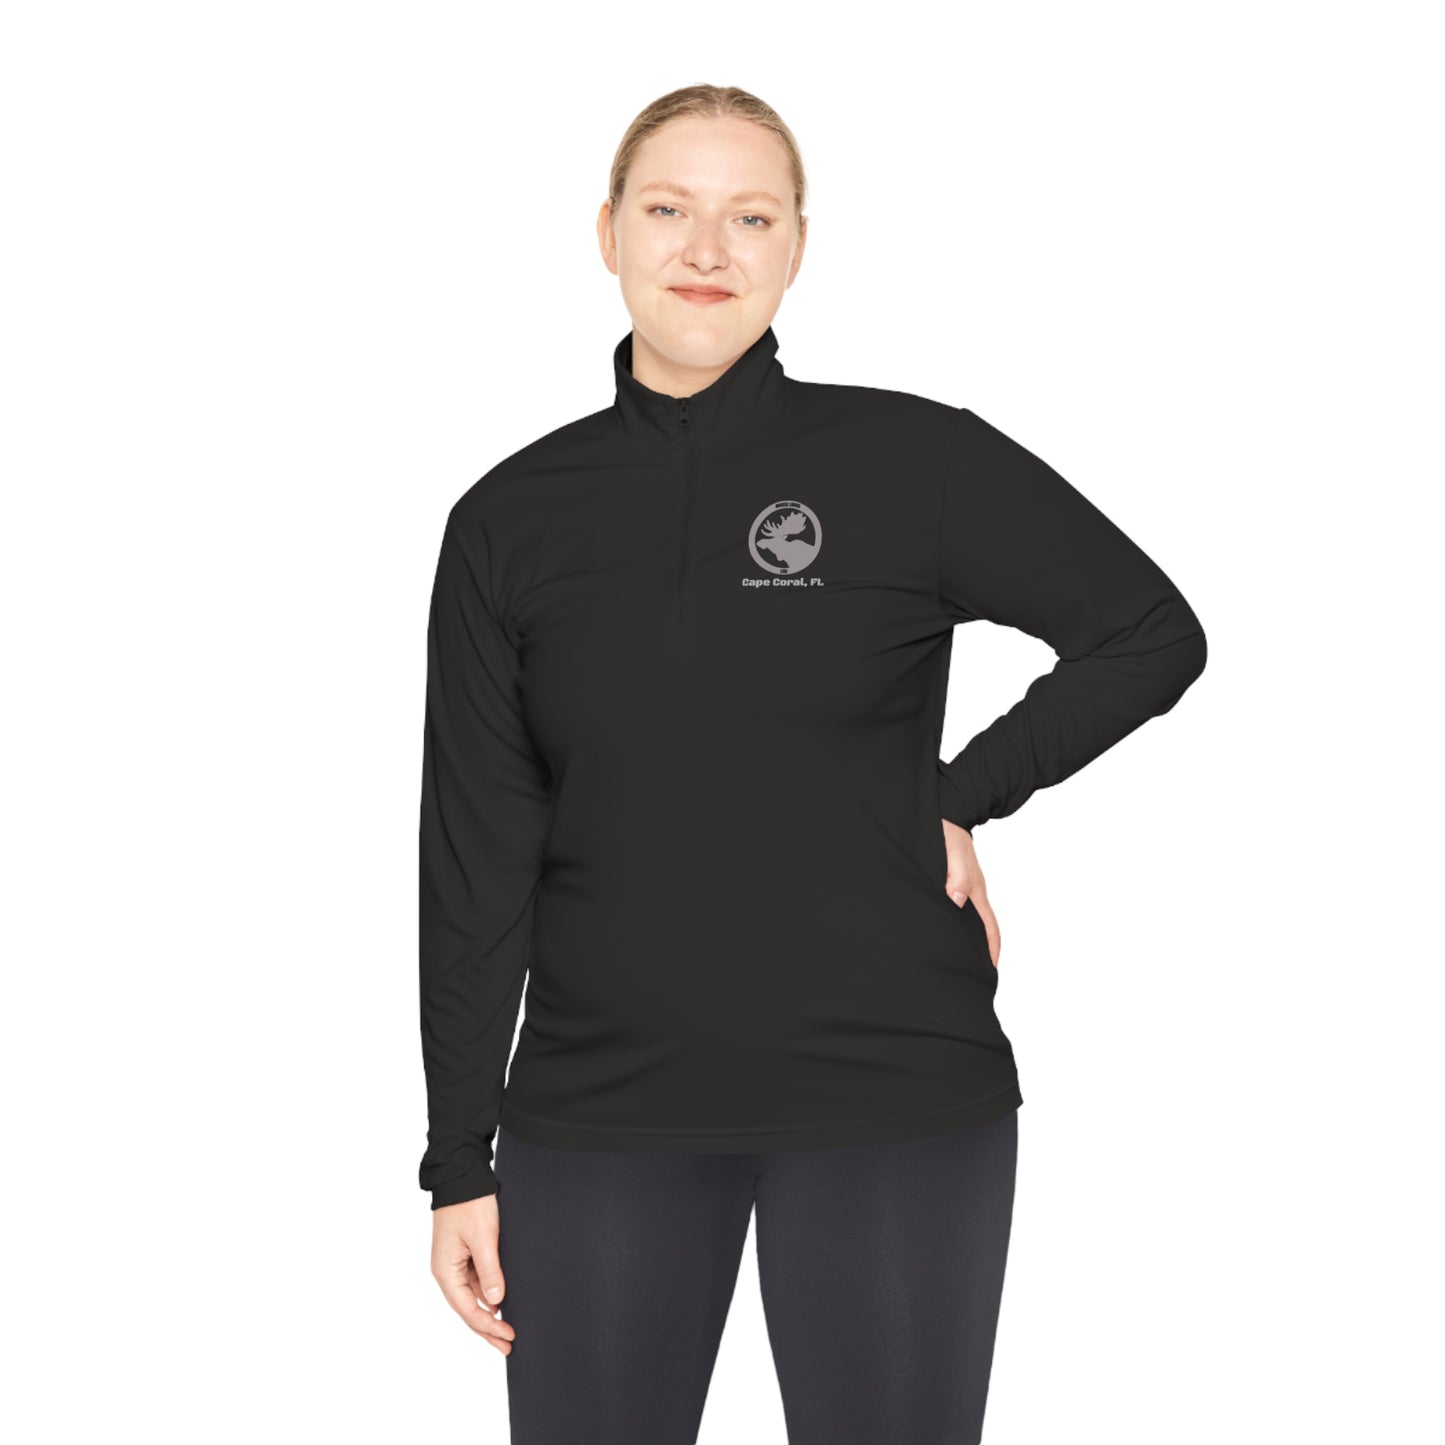 Unisex Quarter-Zip PULLOVER (FRONT Graphics Only)